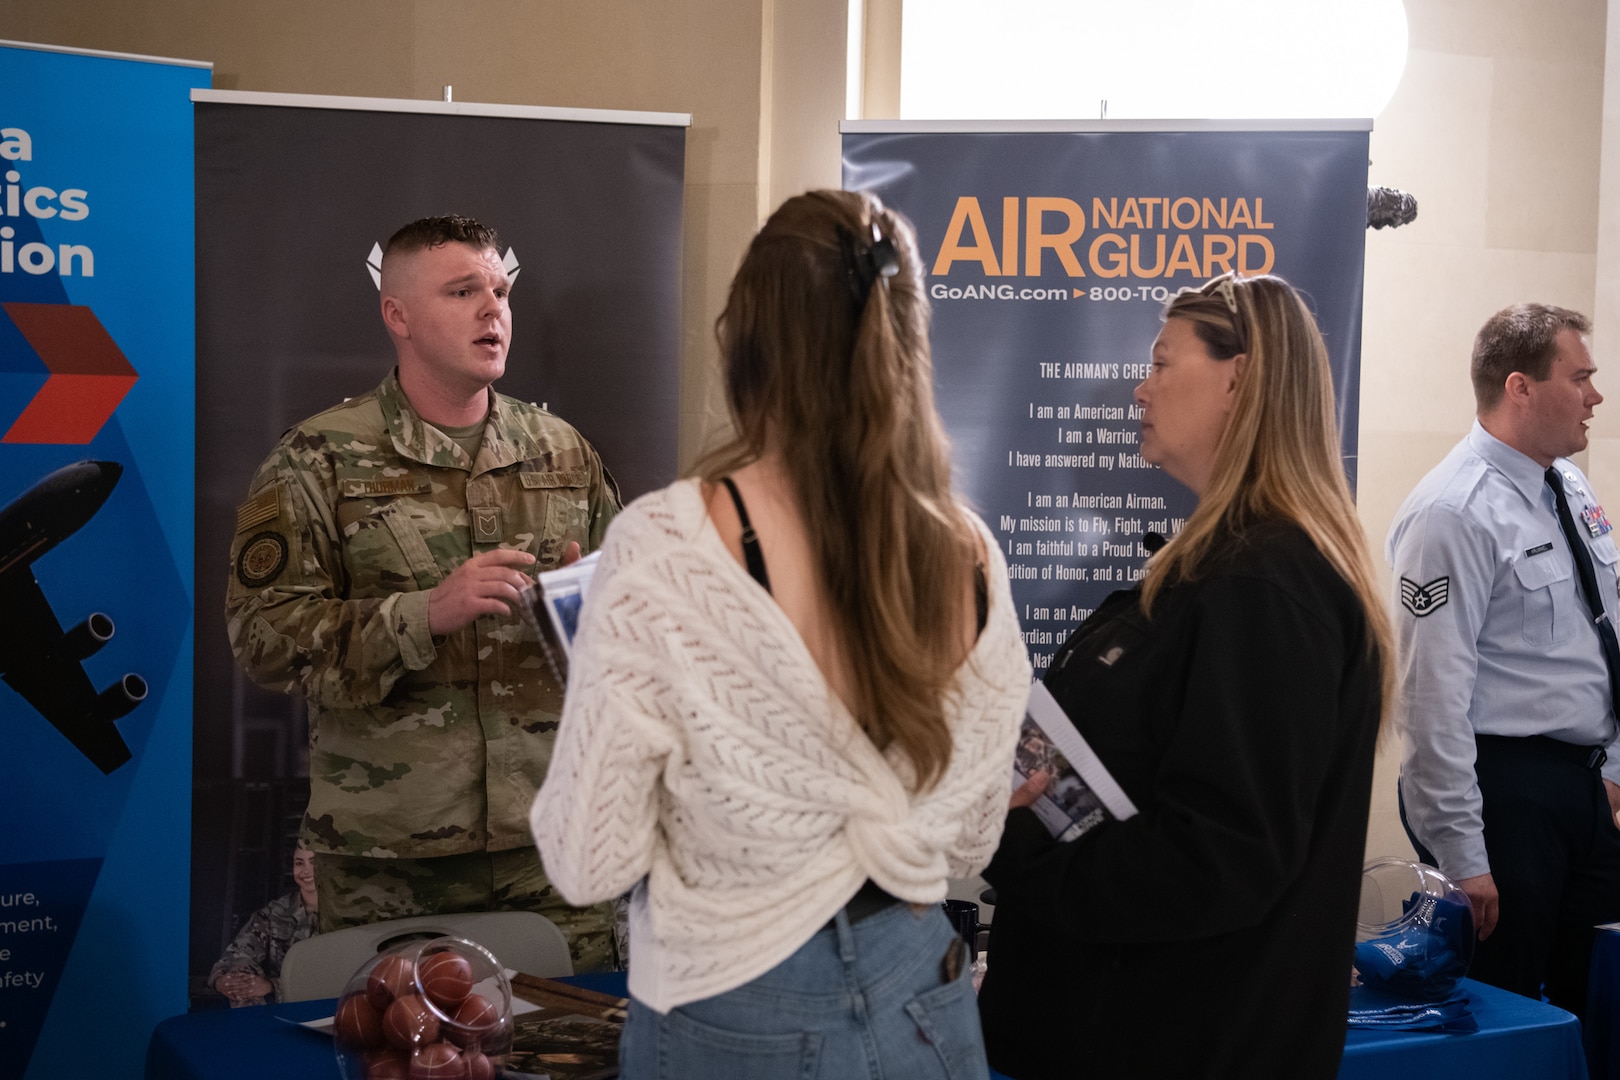 Tech. Sgt. Brandon Thurman, 138th Fighter Wing recruiter, speaks with attendees of AERO Oklahoma at the State Capitol building in Oklahoma City, March 30, 2022. The purpose of the day was to recognize the state’s aviation, aerospace, and defense industry as a vital economic engine for the state and provided a unique opportunity for industry officials to come together and meet with state legislators and other elected officials to show them firsthand how the industry continues to solidify Oklahoma as a worldwide leader in aviation, aerospace, and aerospace and defense. (Oklahoma Air National Guard photo by Tech. Sgt. Rebecca Imwalle)